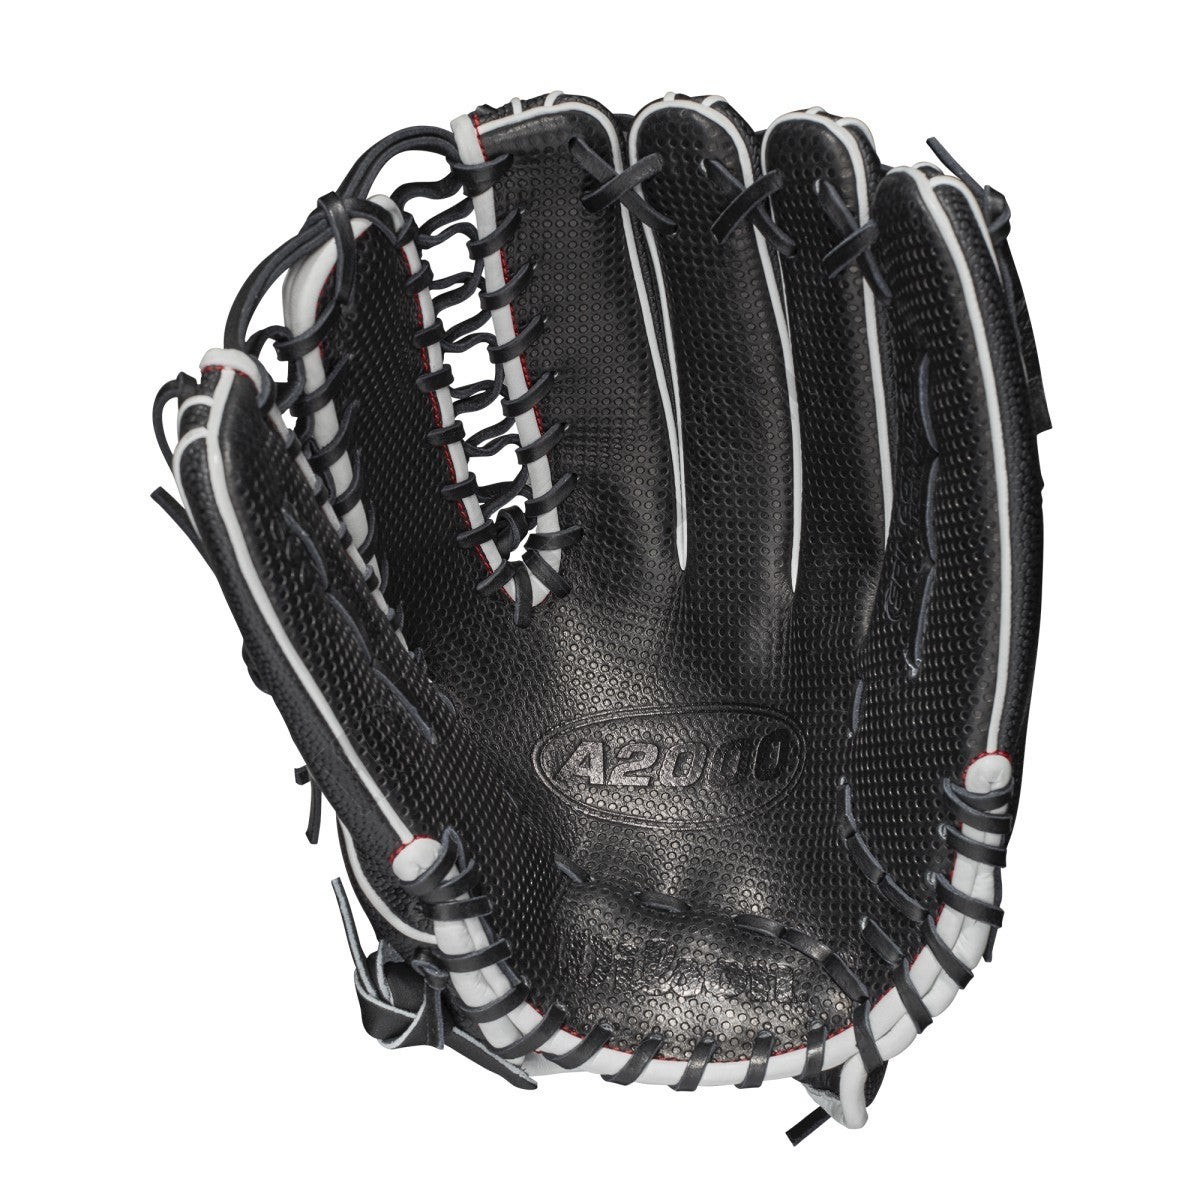 2021 A2000 SCOT7SS 12.75" Outfield Baseball Glove ● Wilson Promotions - -2